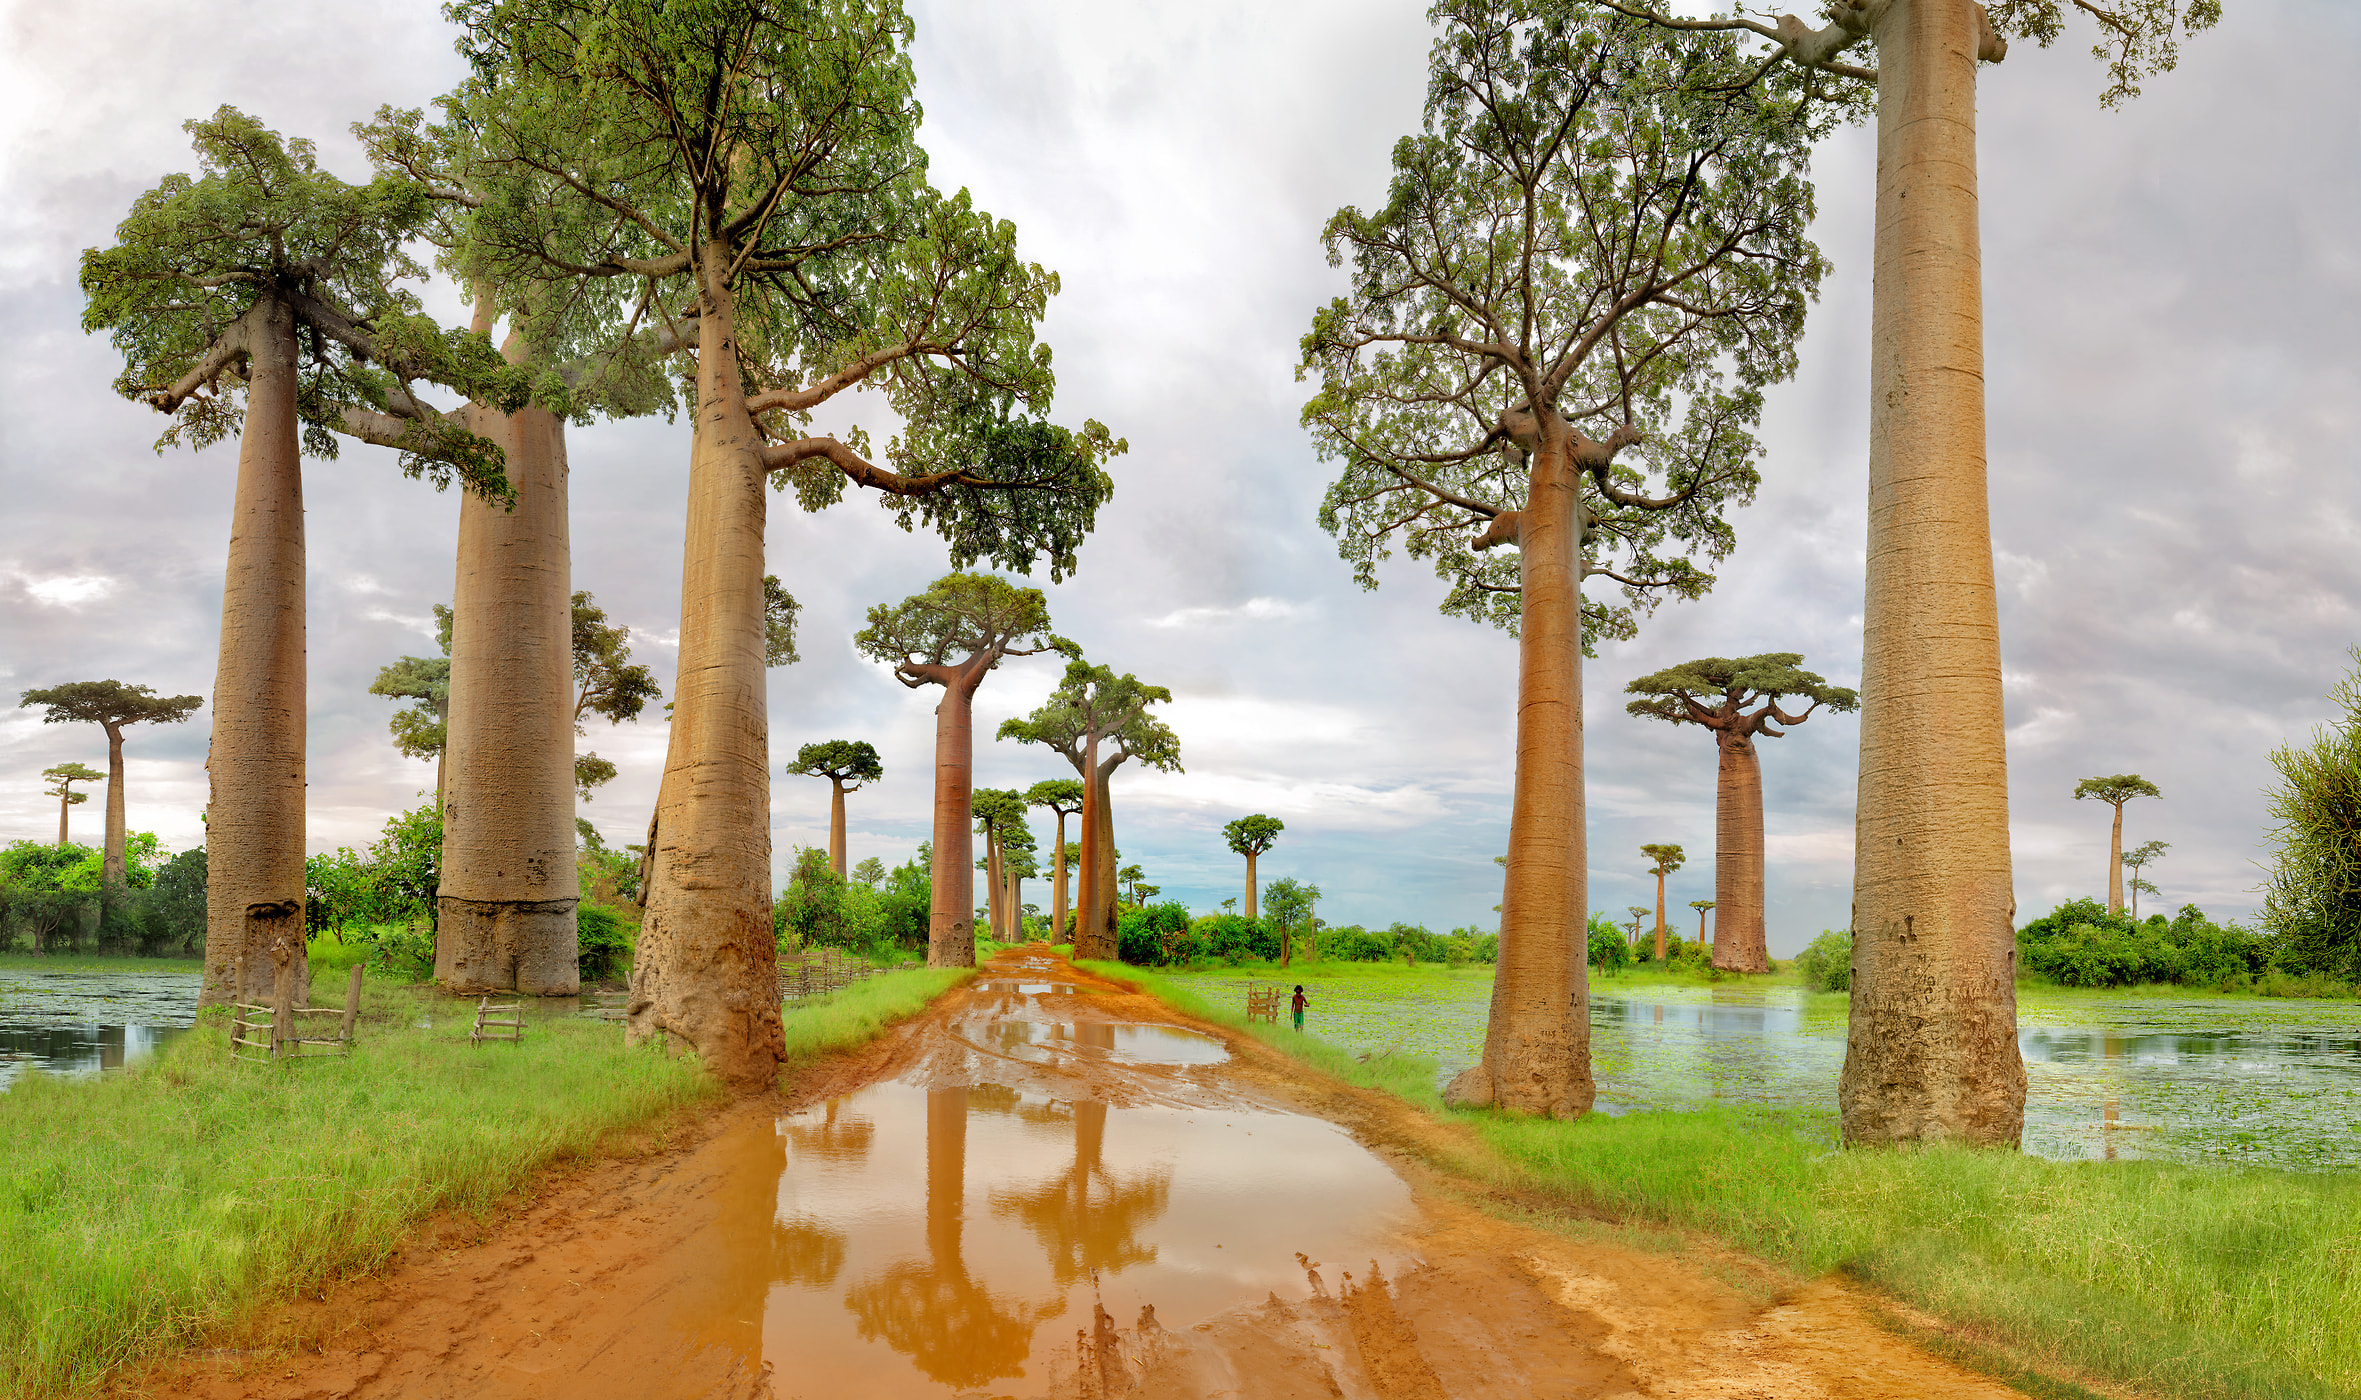 233 megapixels! A very high resolution, large-format VAST photo print of baobab trees along a dirt road; nature photograph created by Peter Rodger in Madagascar